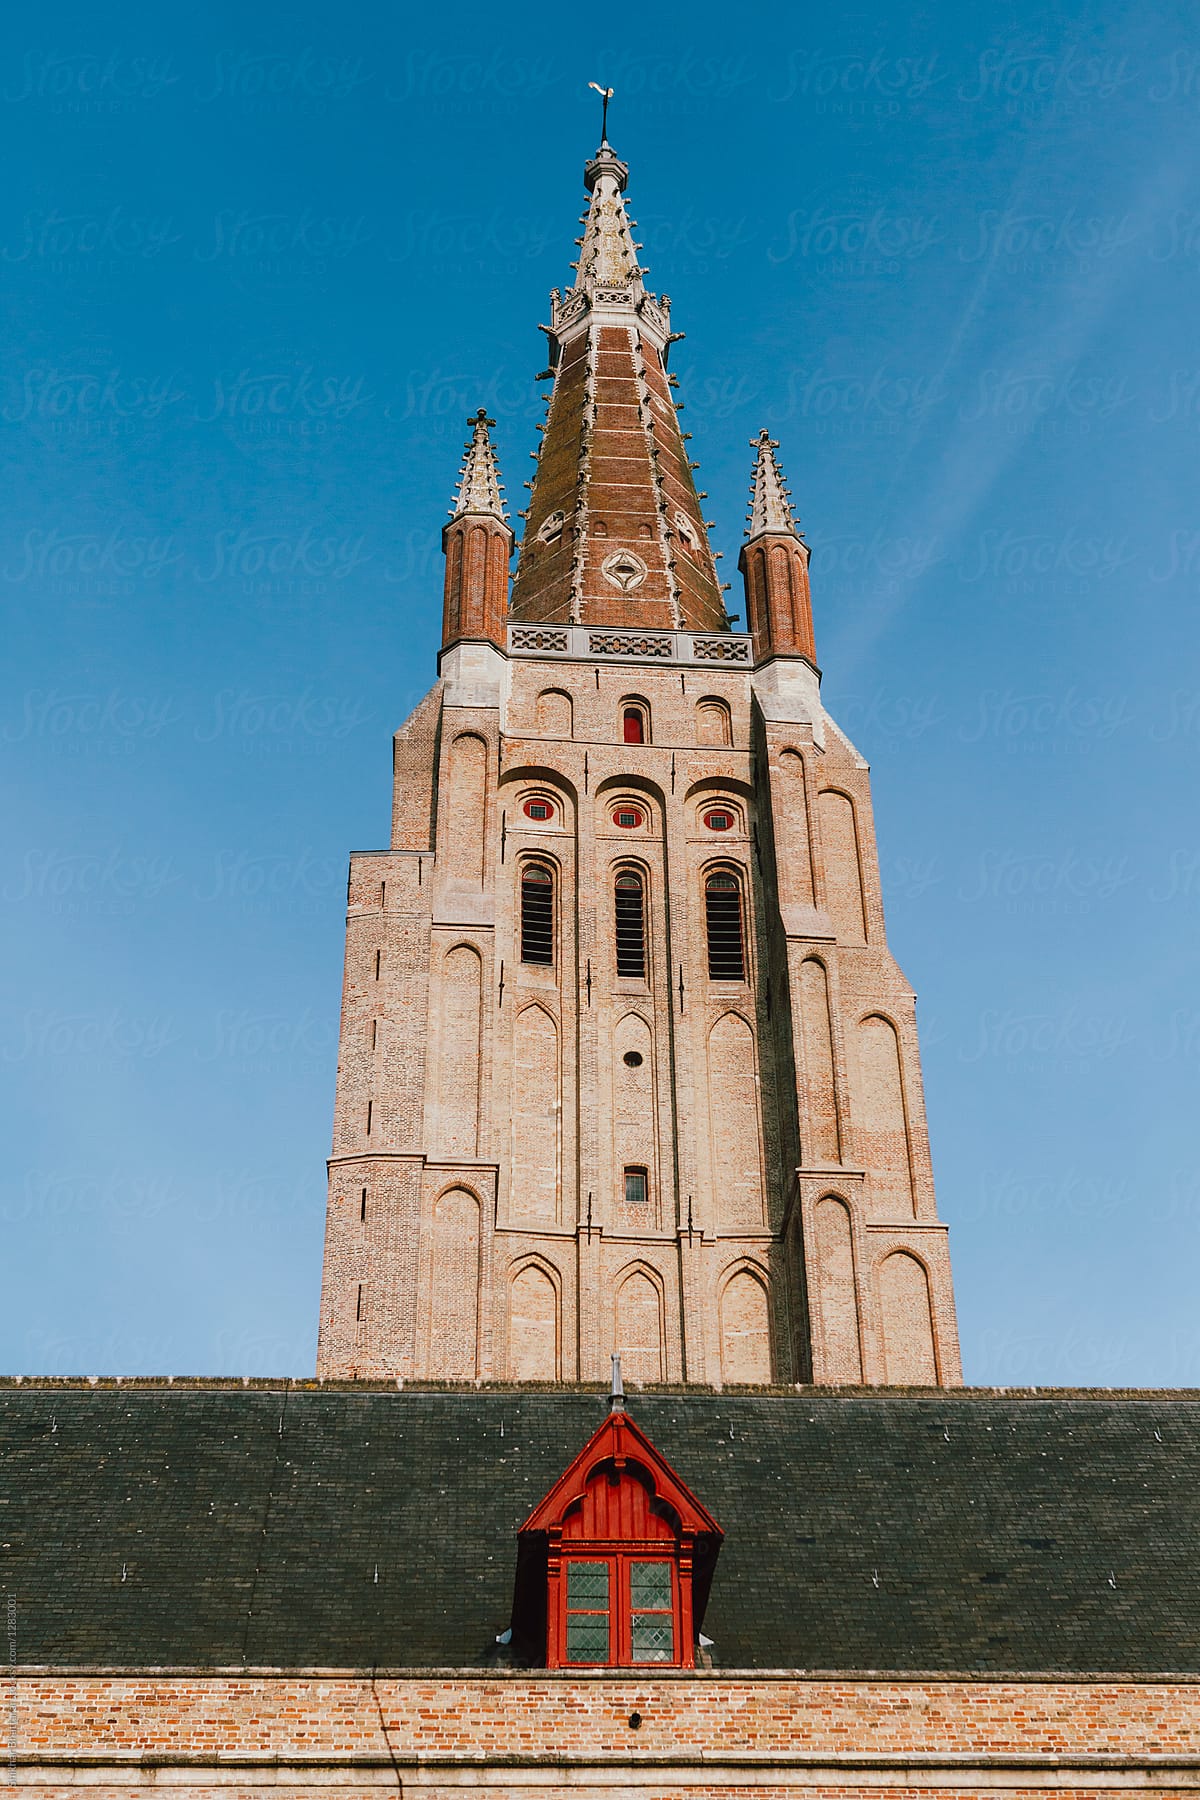 View of Church of Our Lady from the streets in Bruges, Belgium.